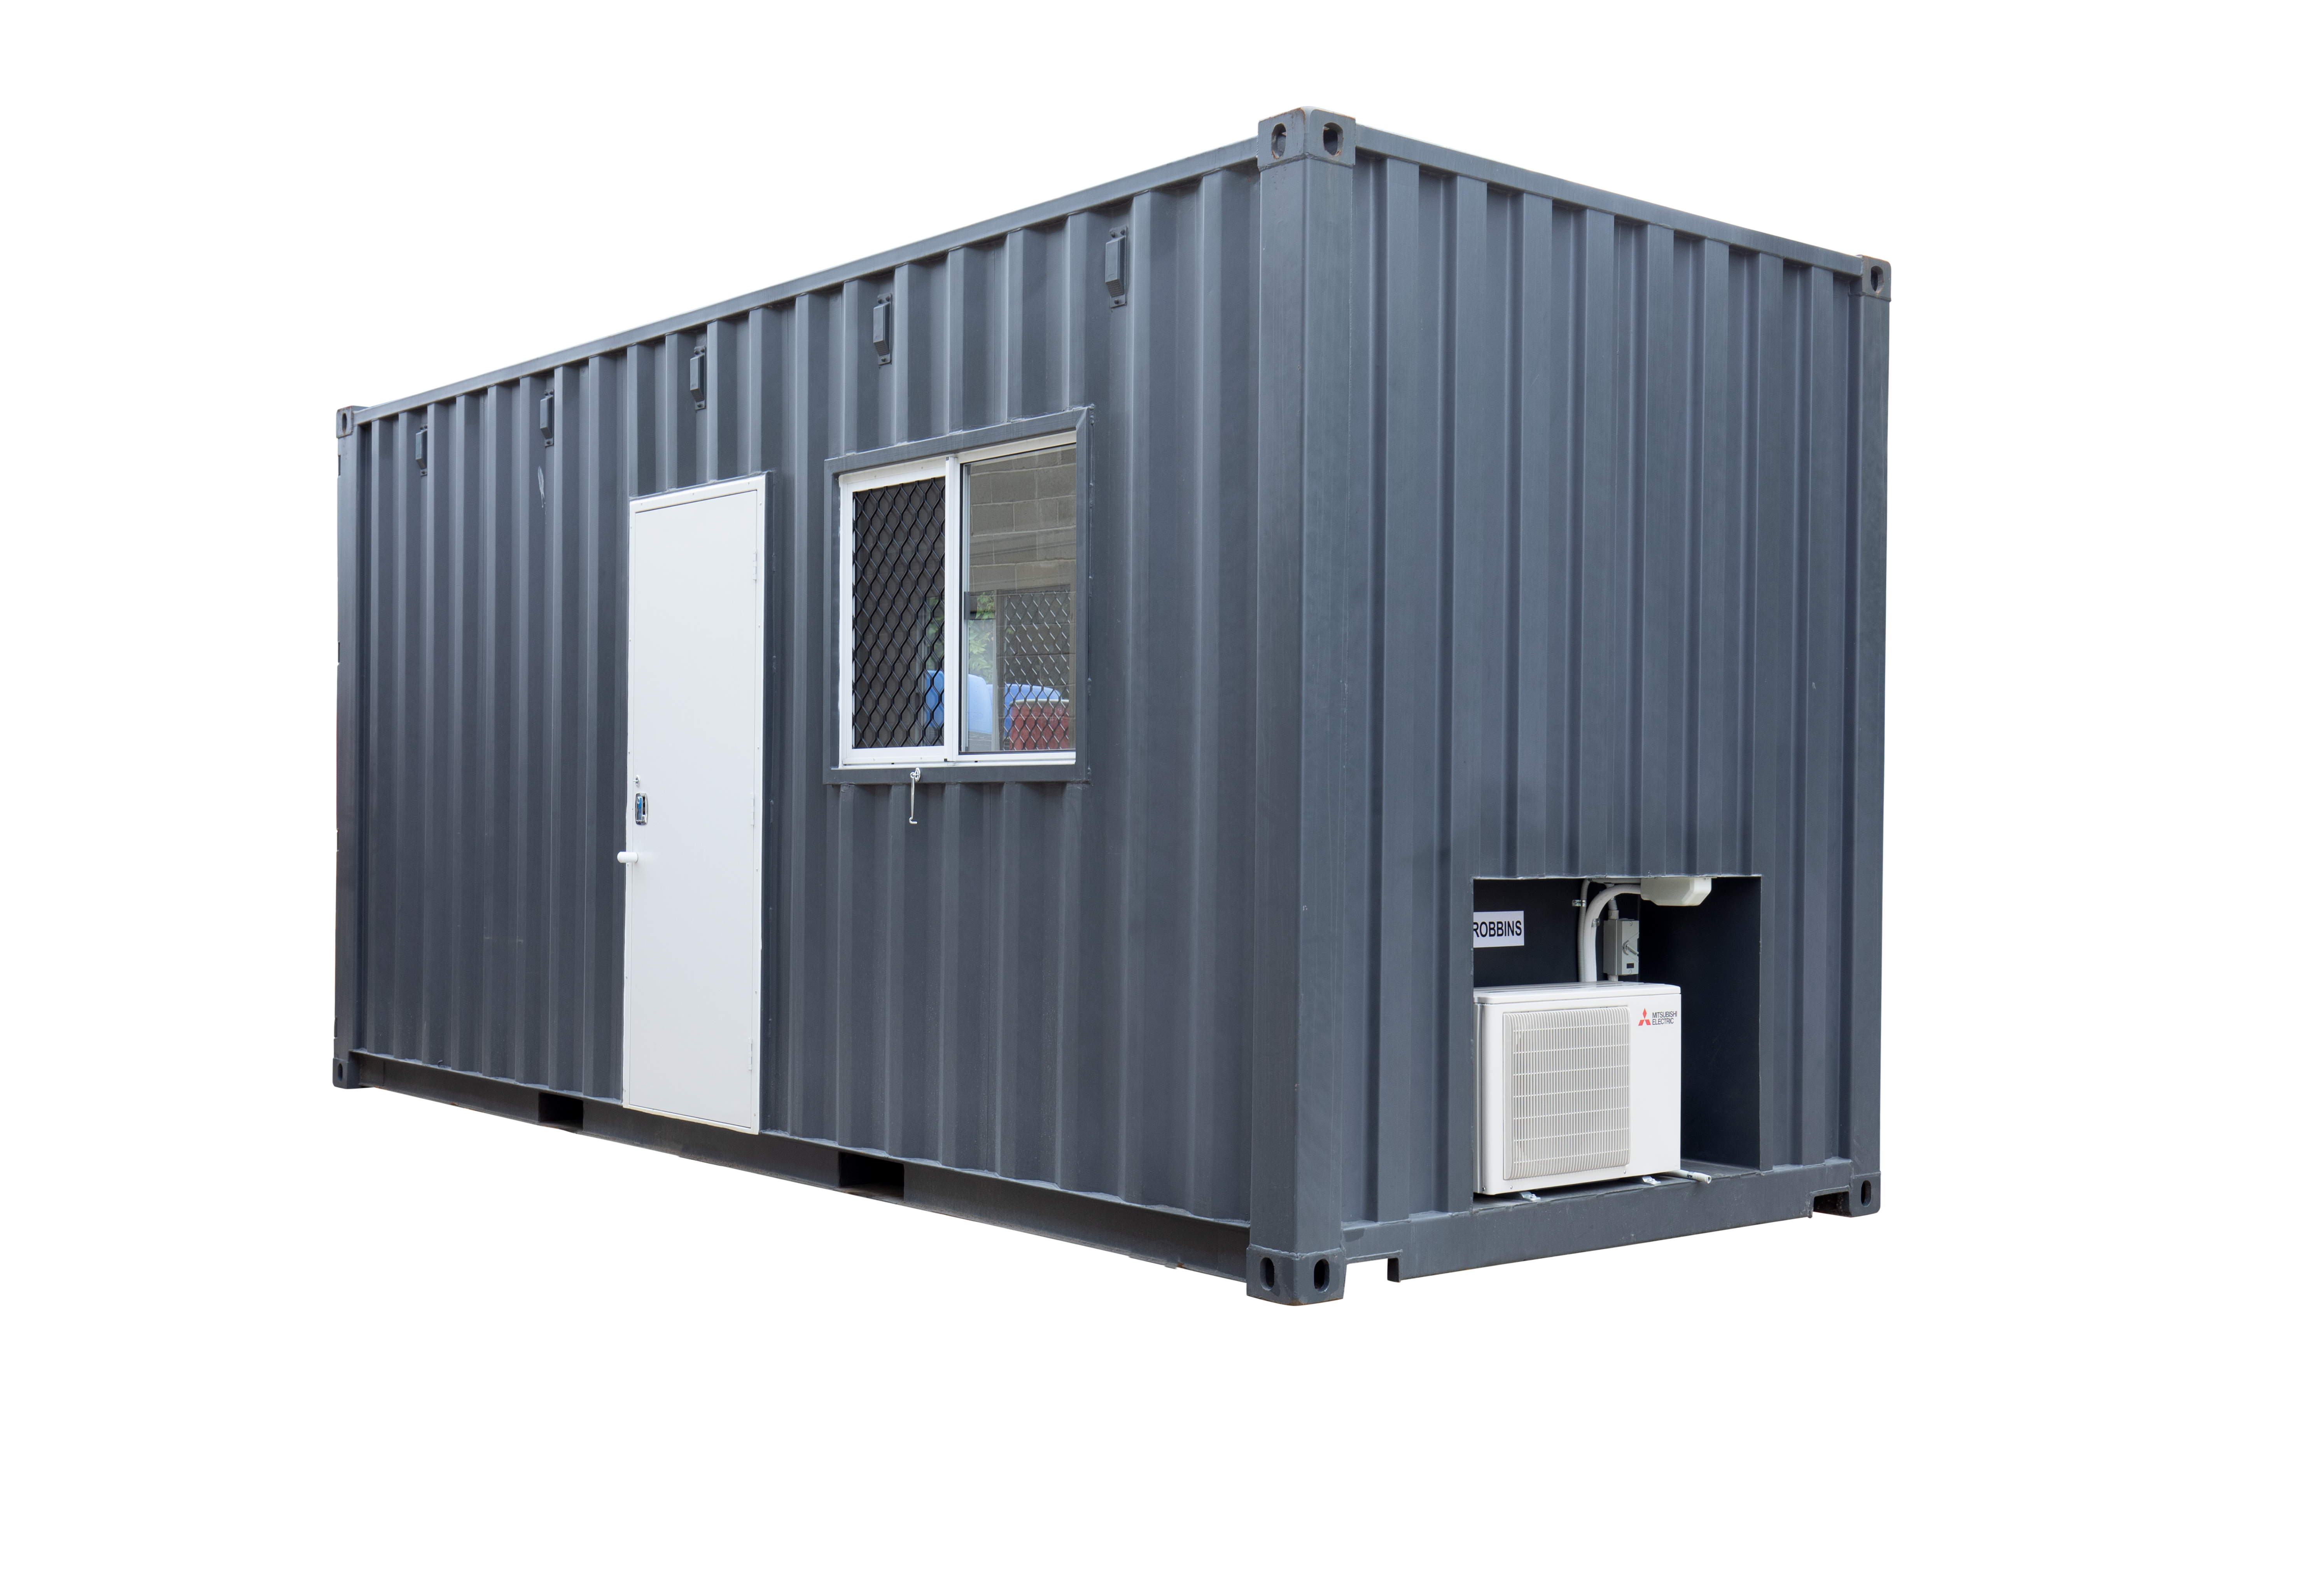 Outside view of the containerised mobile LST lab facility